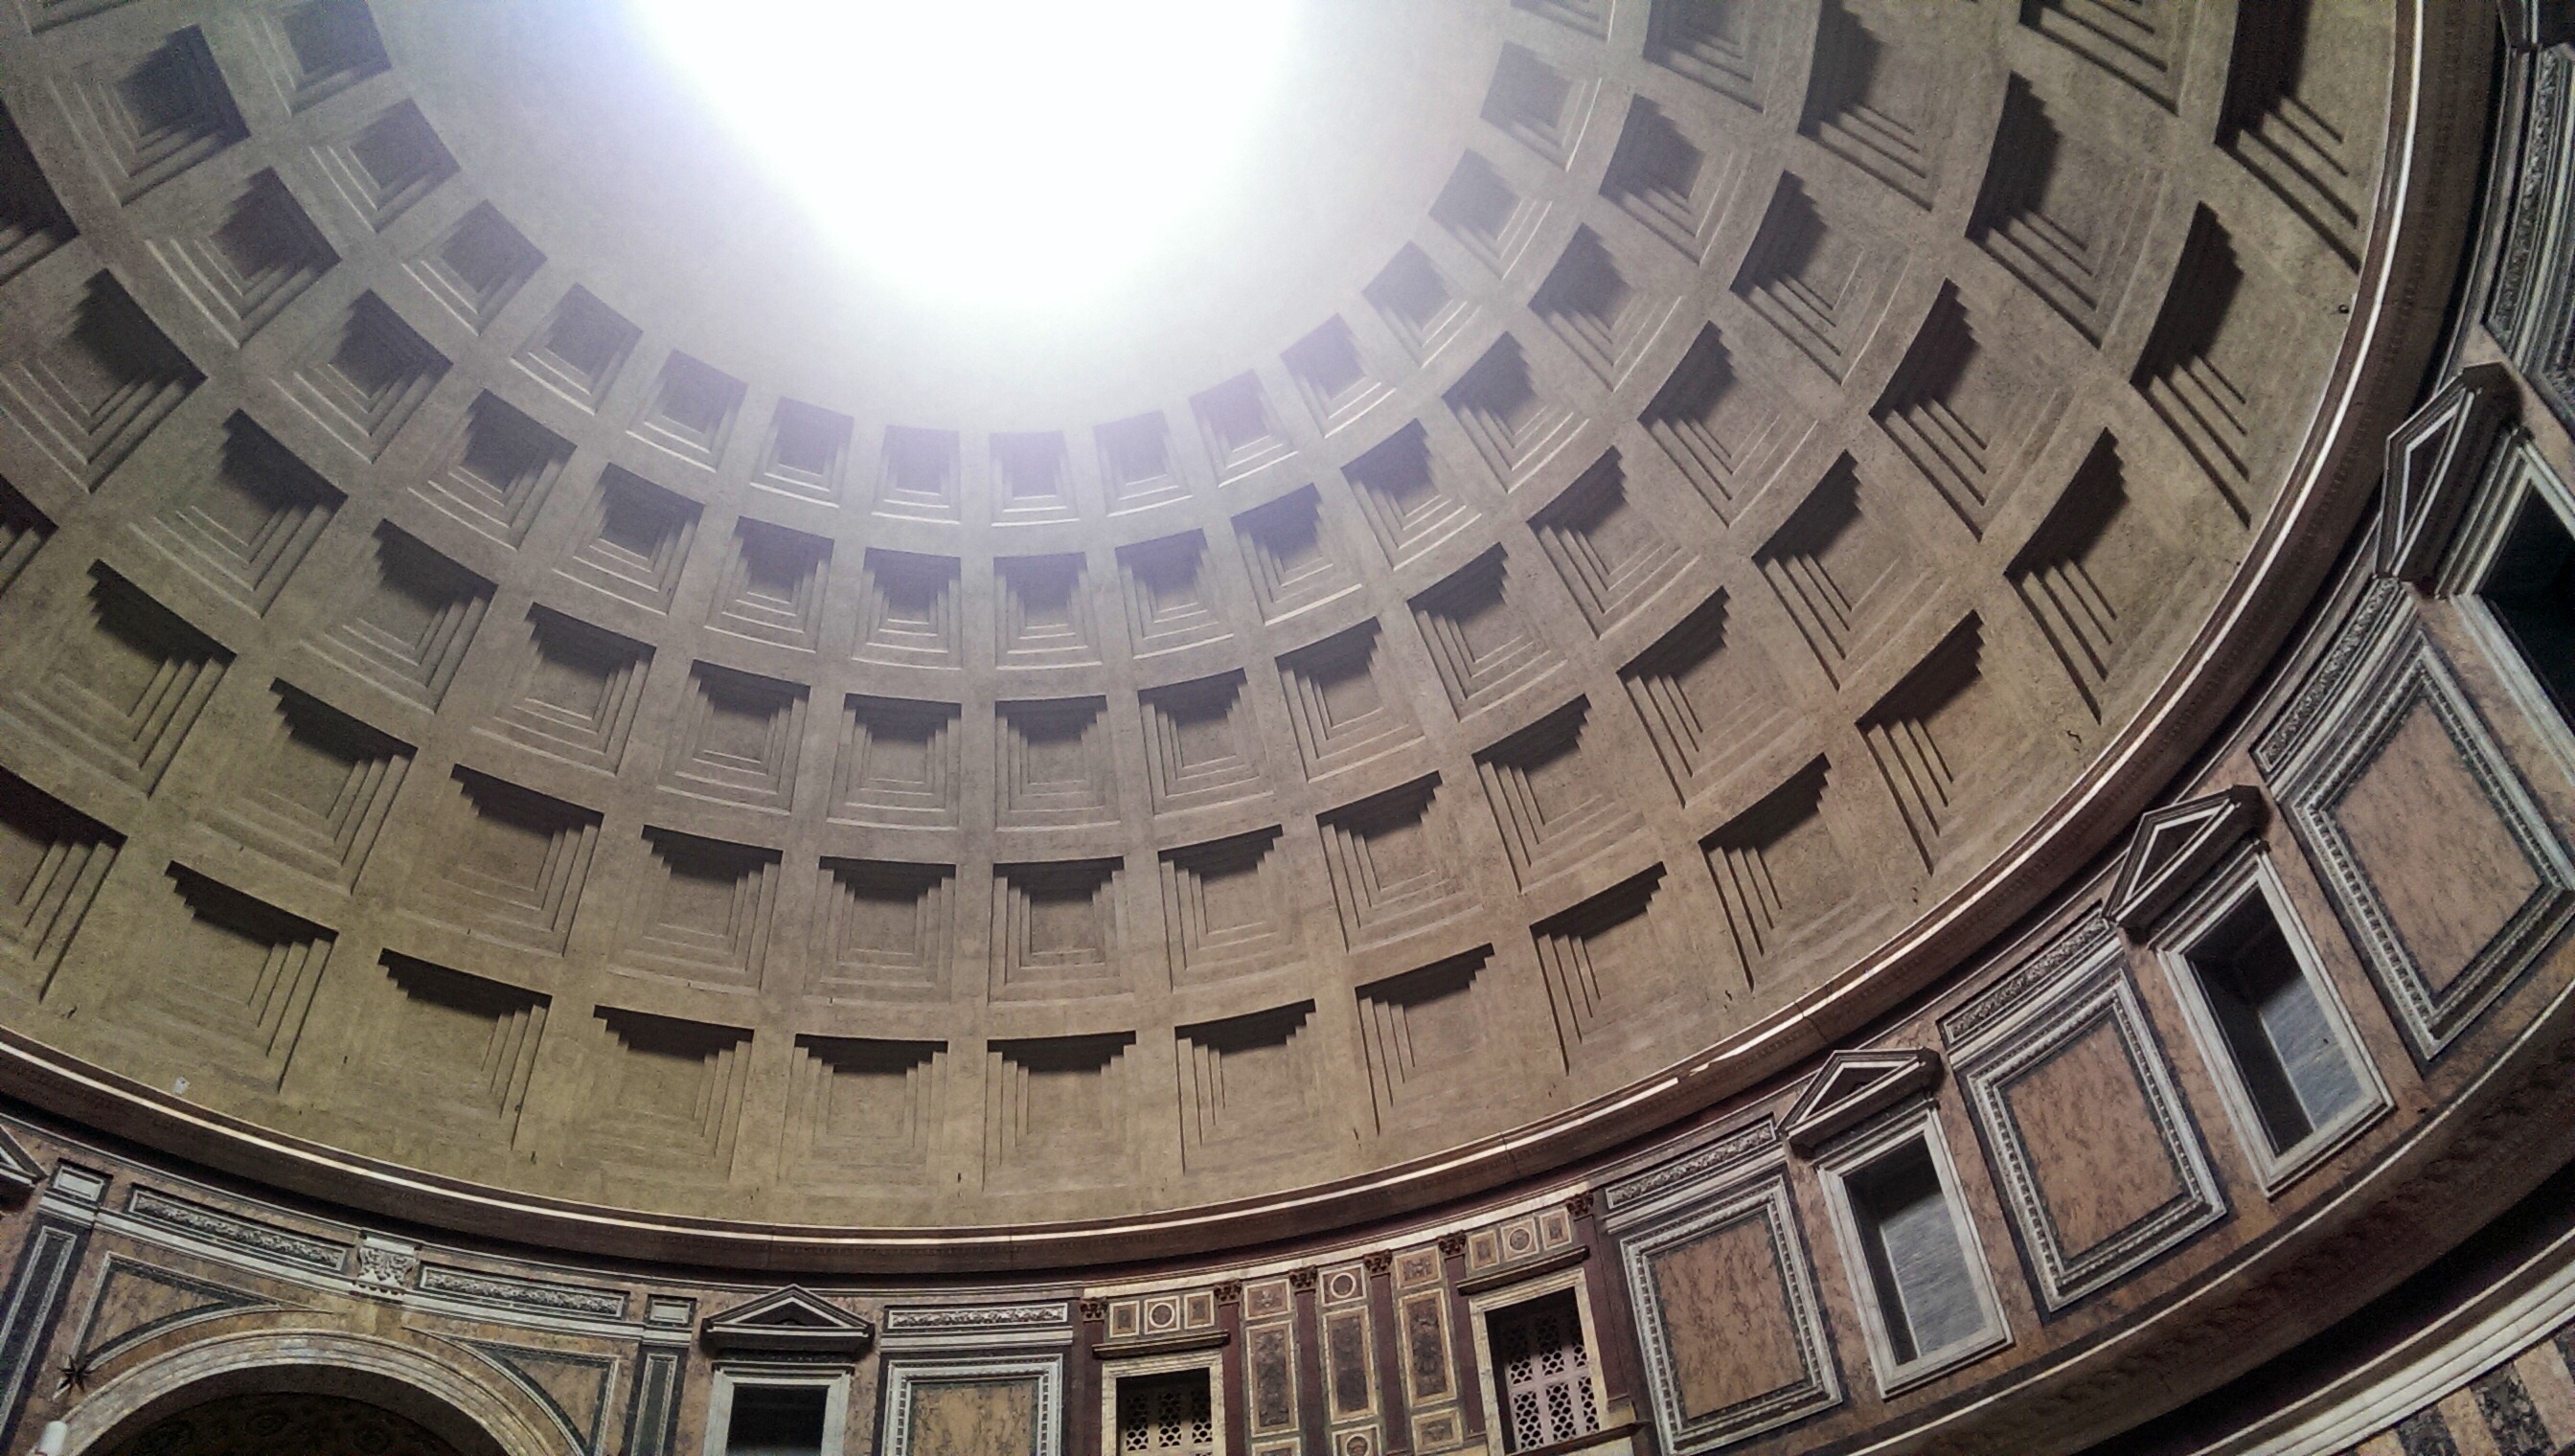 24 hrs in Rome the pantheon